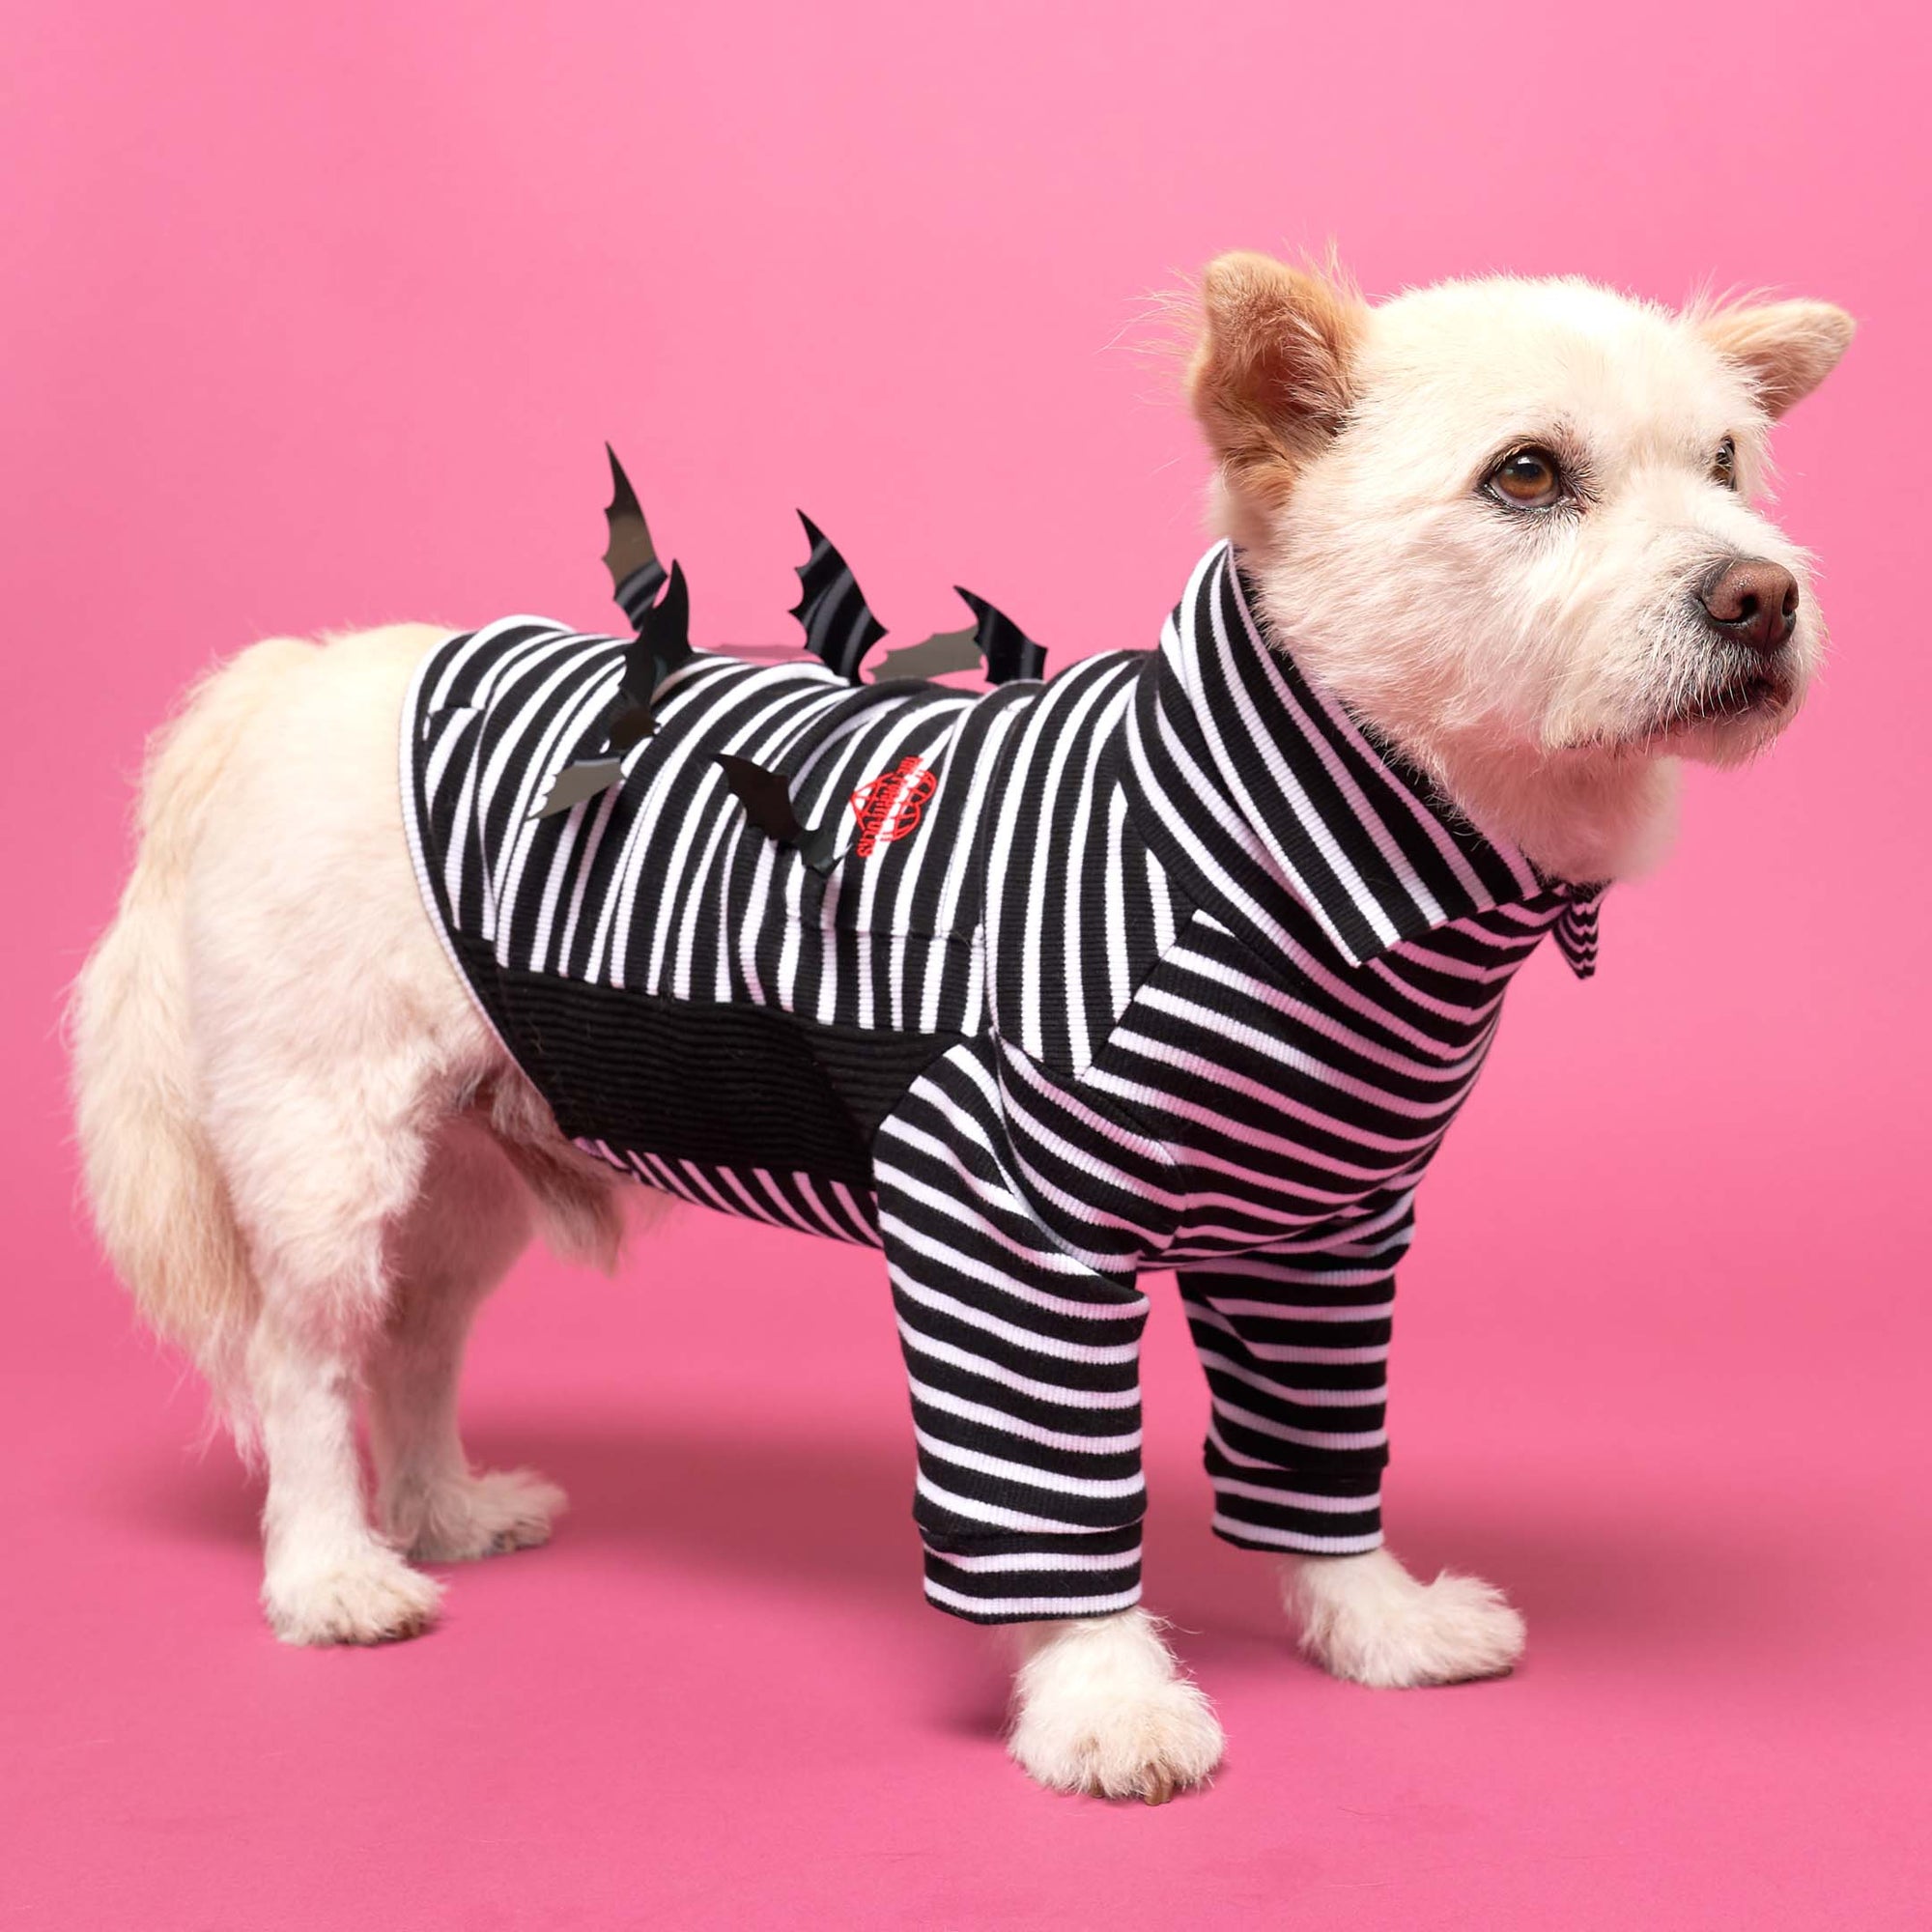 White dog in a playful striped bat-wing t-shirt against a pink backdrop.